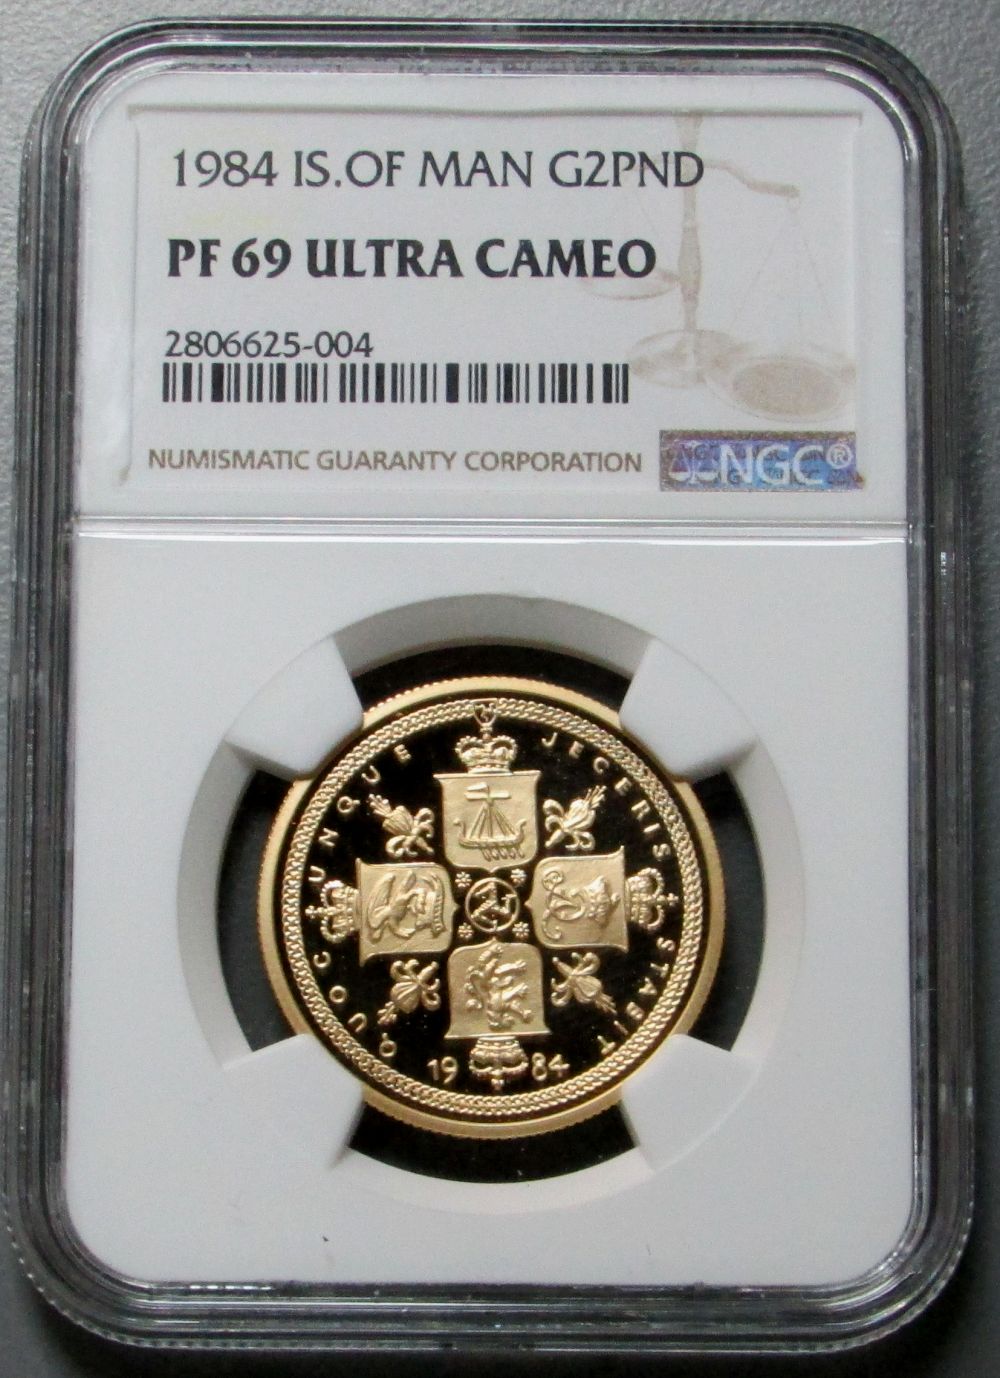 1984 GOLD ISLE OF MAN 2 SOVEREIGN COIN NGC PROOF 69 ULTRA CAMEO LESS THAN 10 MINTED